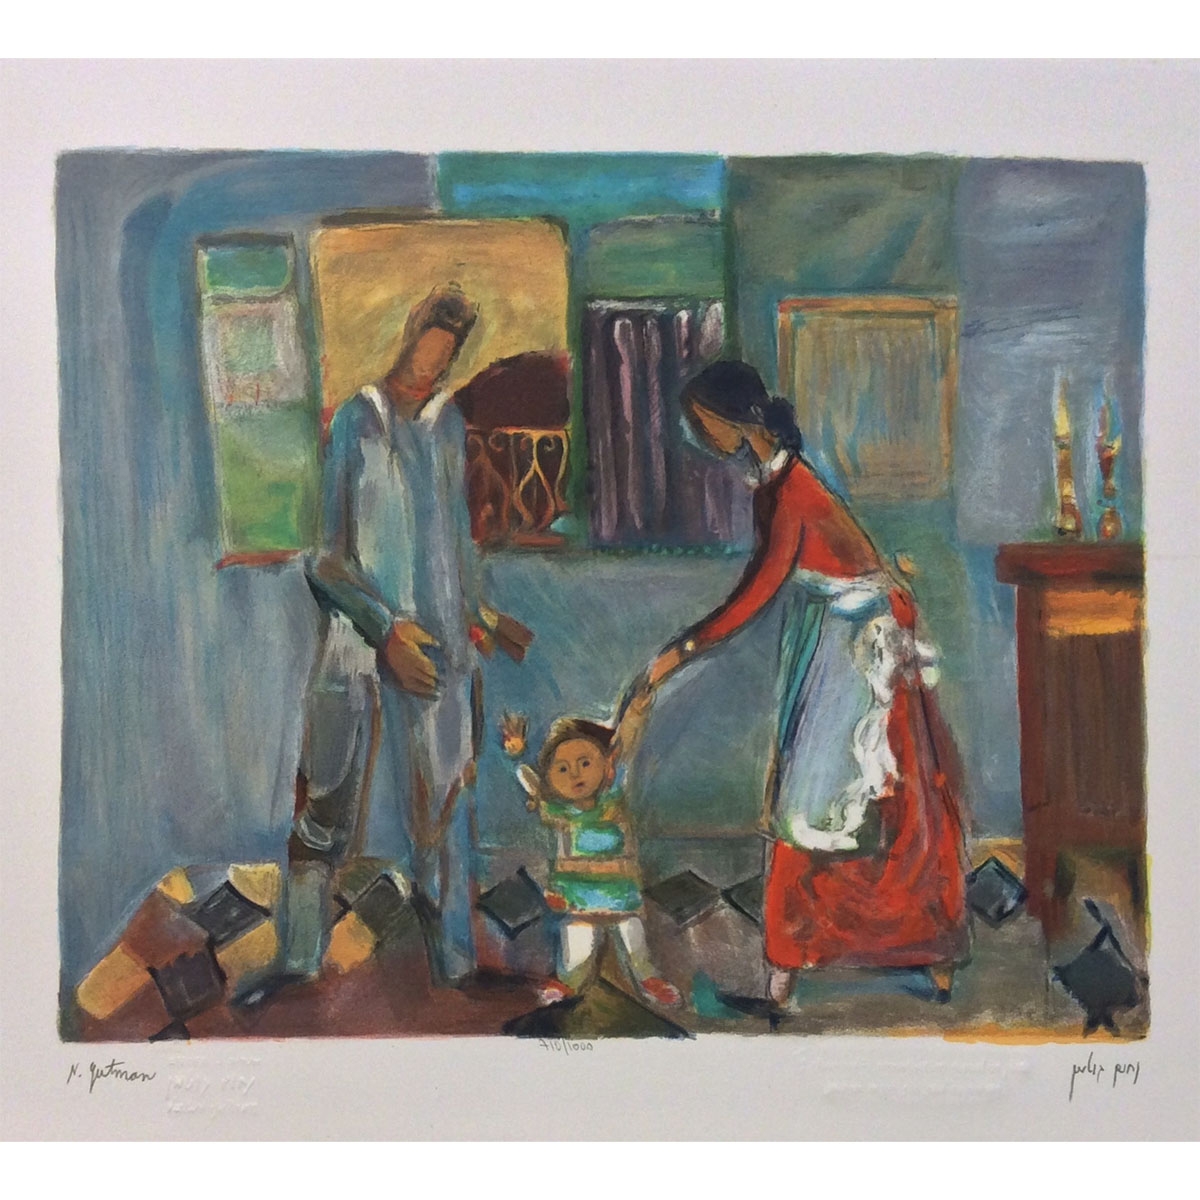  The Family. Artist: Nahum Gutman. Signed & Numbered Limited Edition Lithograph - 1